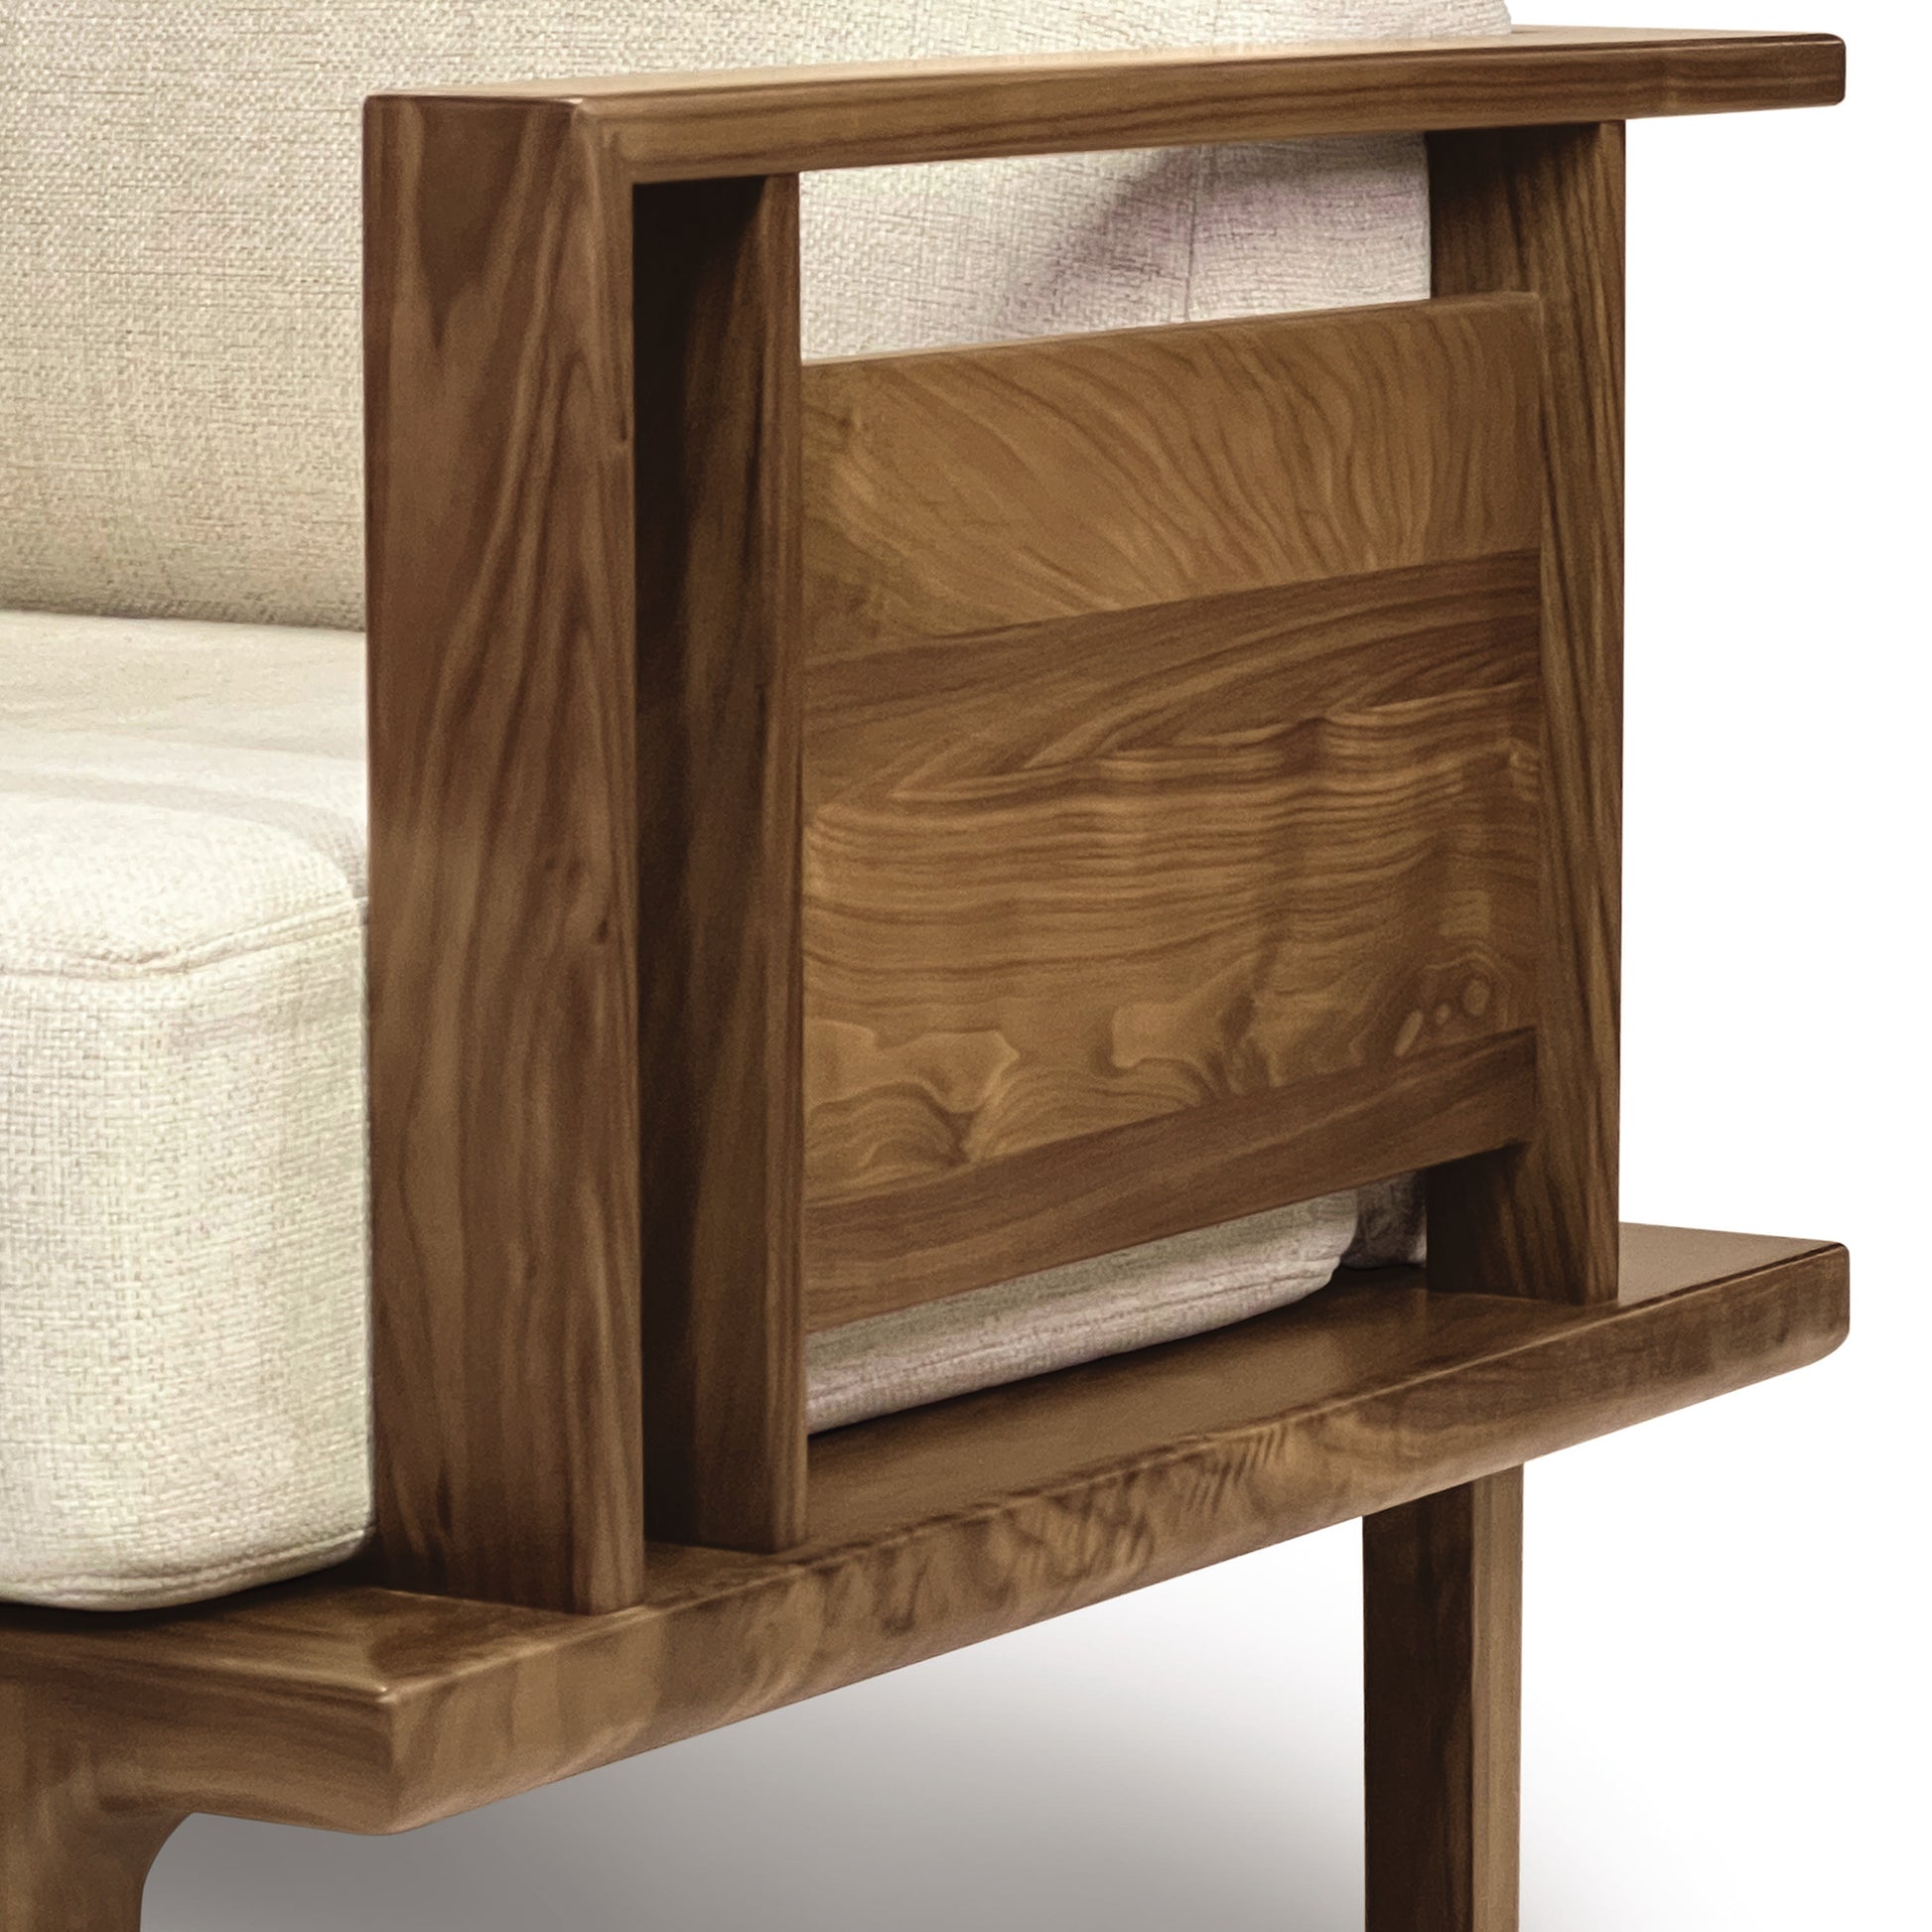 A close-up of a walnut side table with an open lower shelf, adjacent to a light-colored Copeland Furniture Sierra Walnut Upholstered Chair.